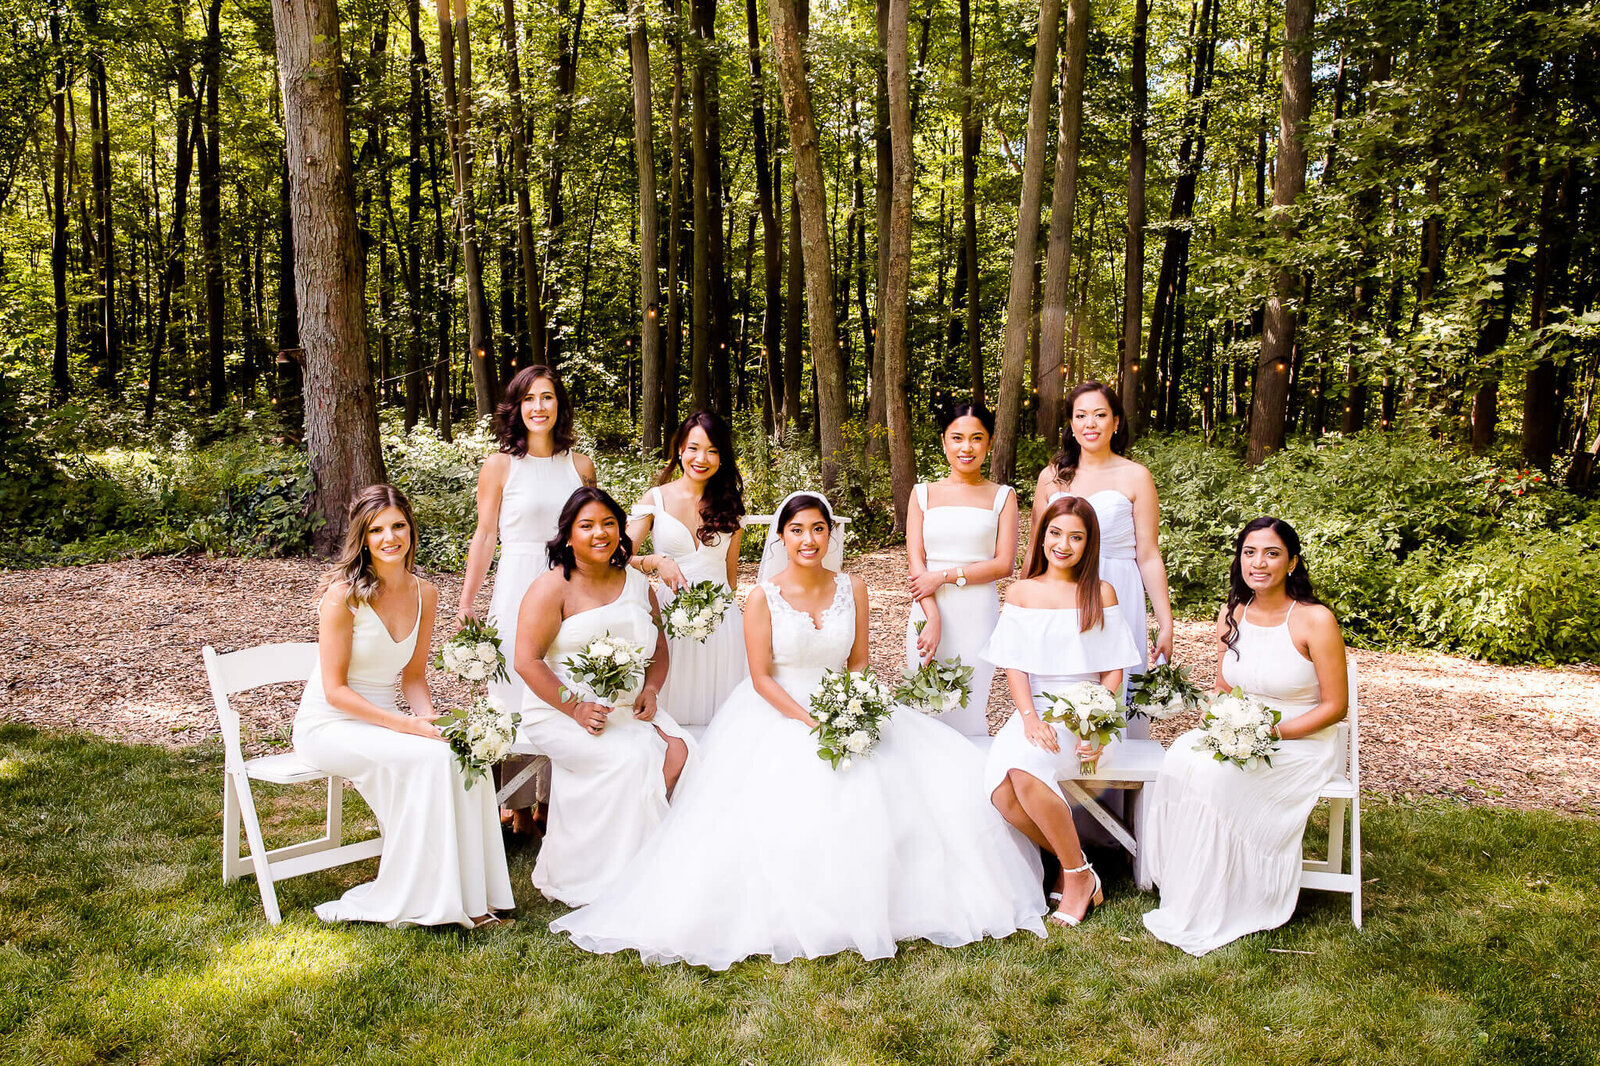 Portraits of bridesmaids in white dresses.